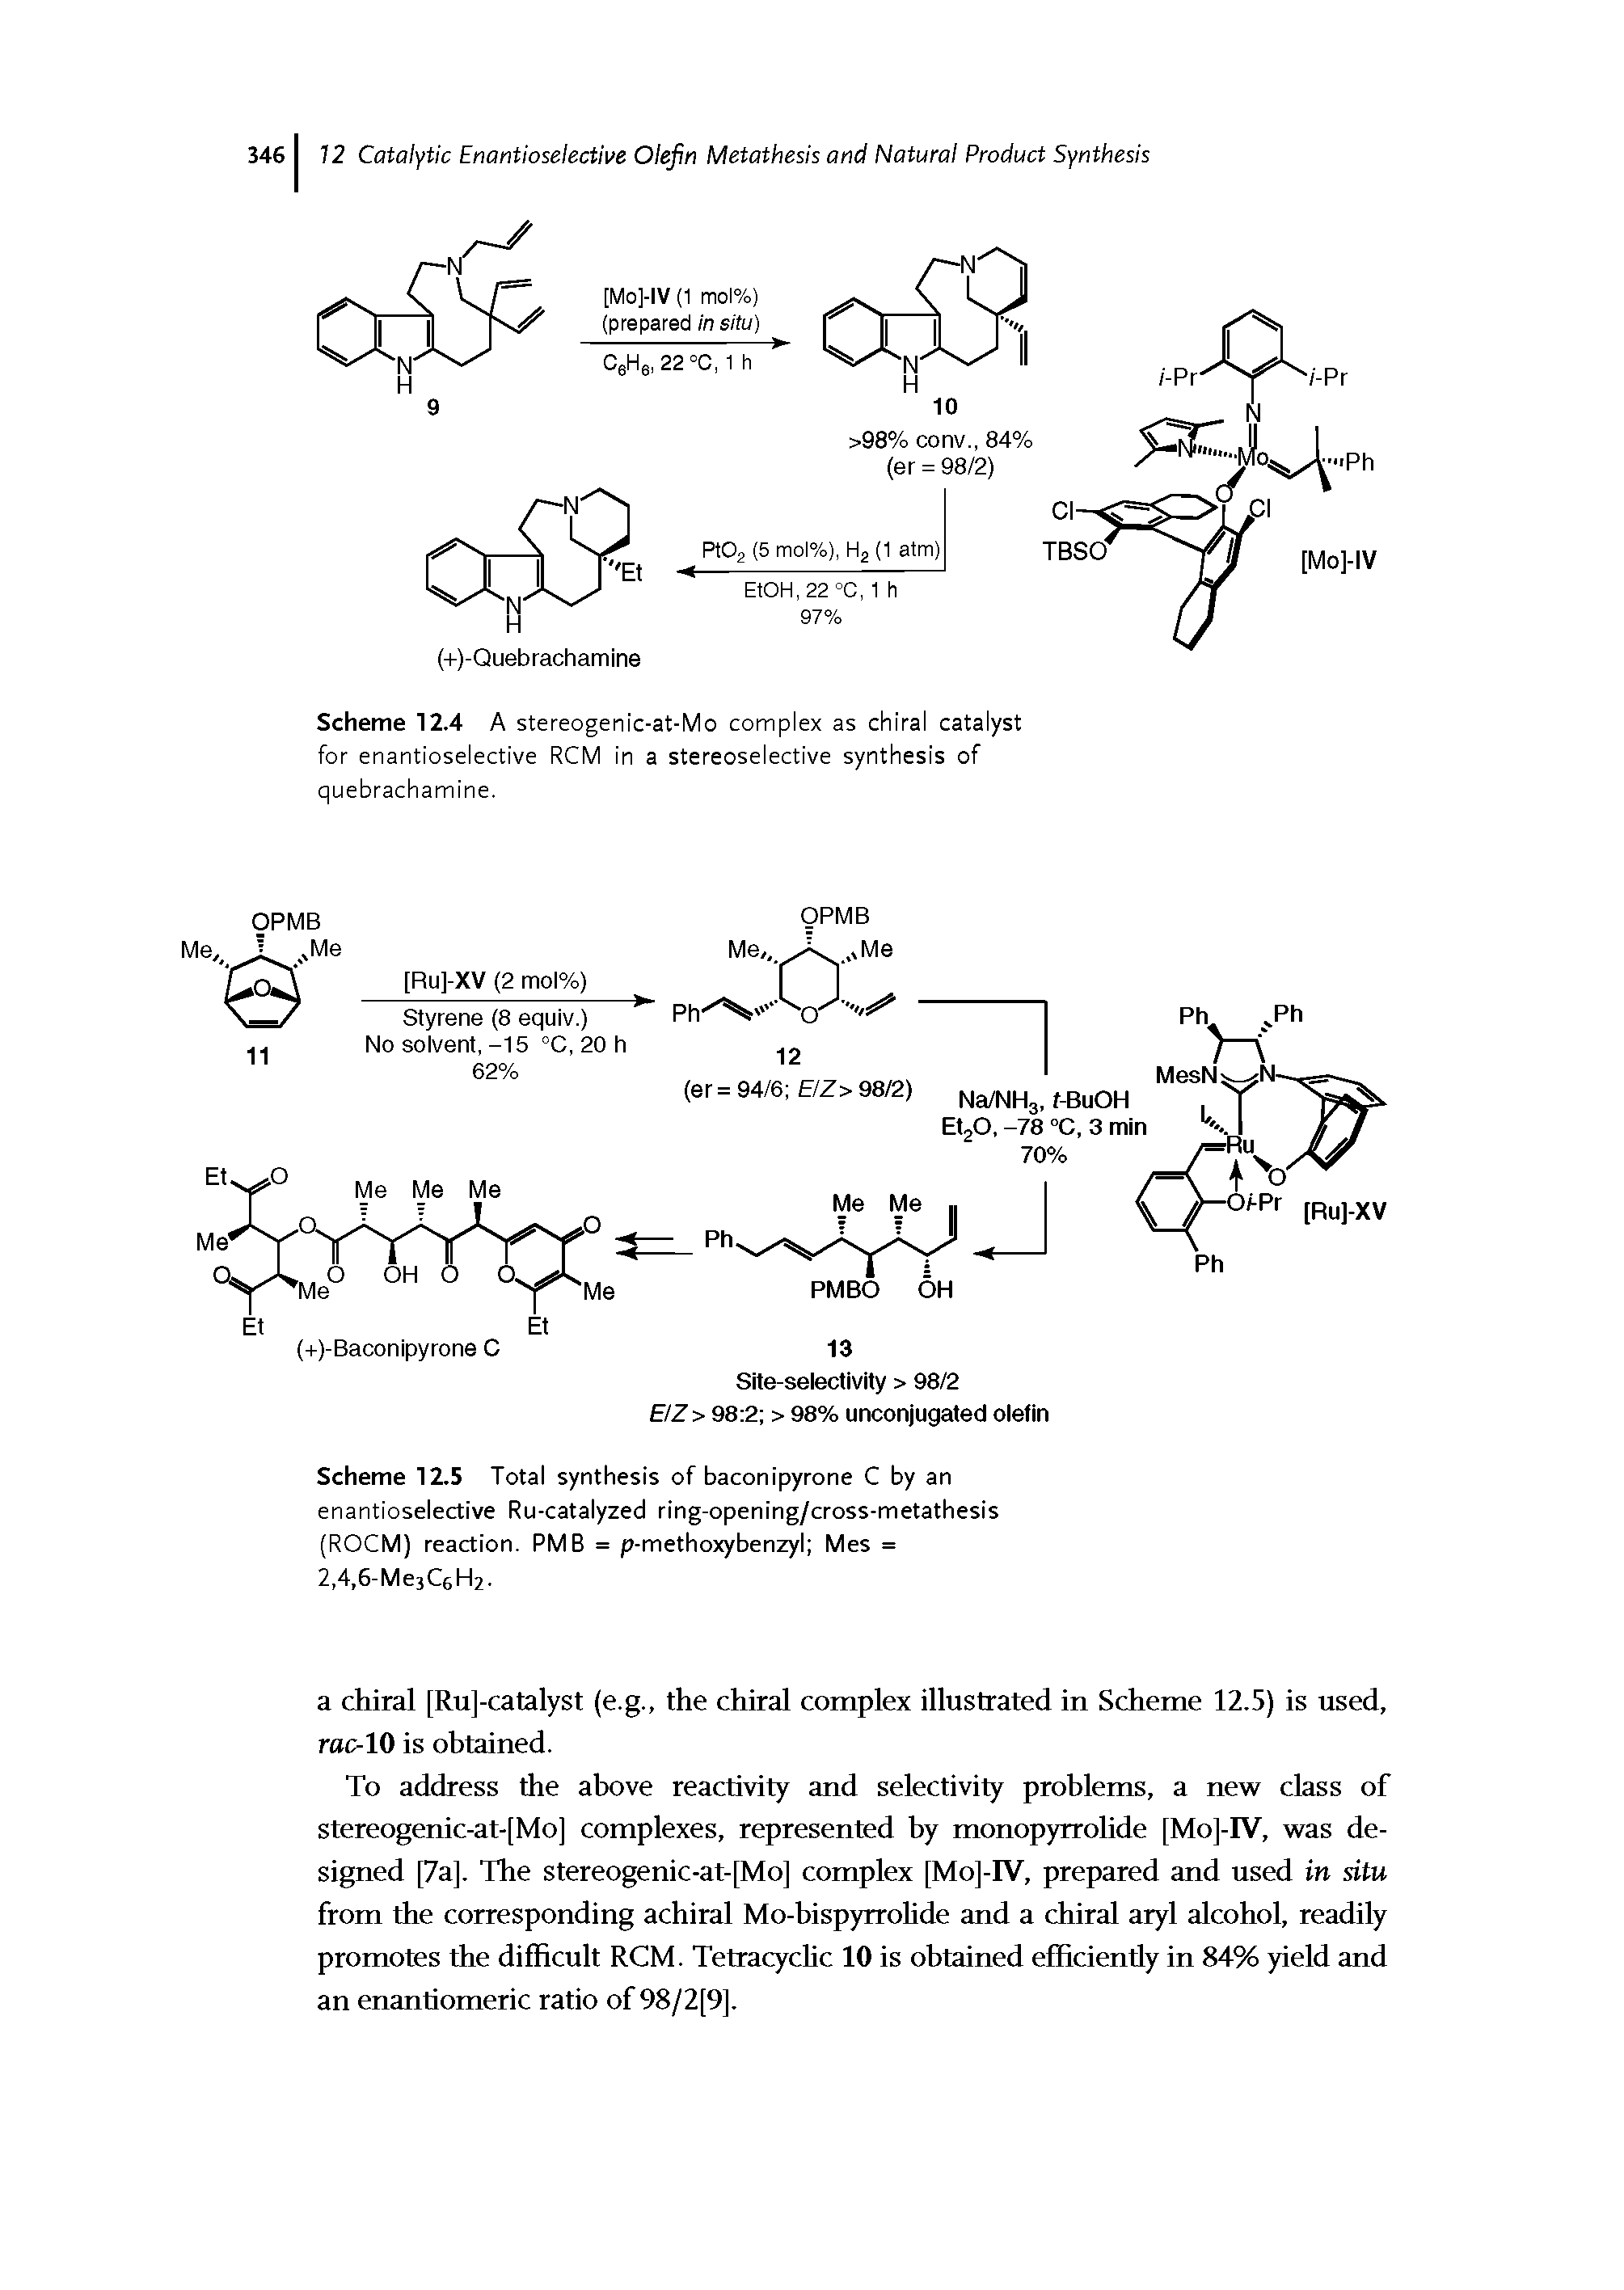 Scheme 12.5 Total synthesis of baconipyrone C by an enantioselective Ru-catalyzed ring-opening/cross-metathesis (ROCM) reaction. PMB = p-methoxybenzyl Mes = 2,4,6-Me3C6H2.